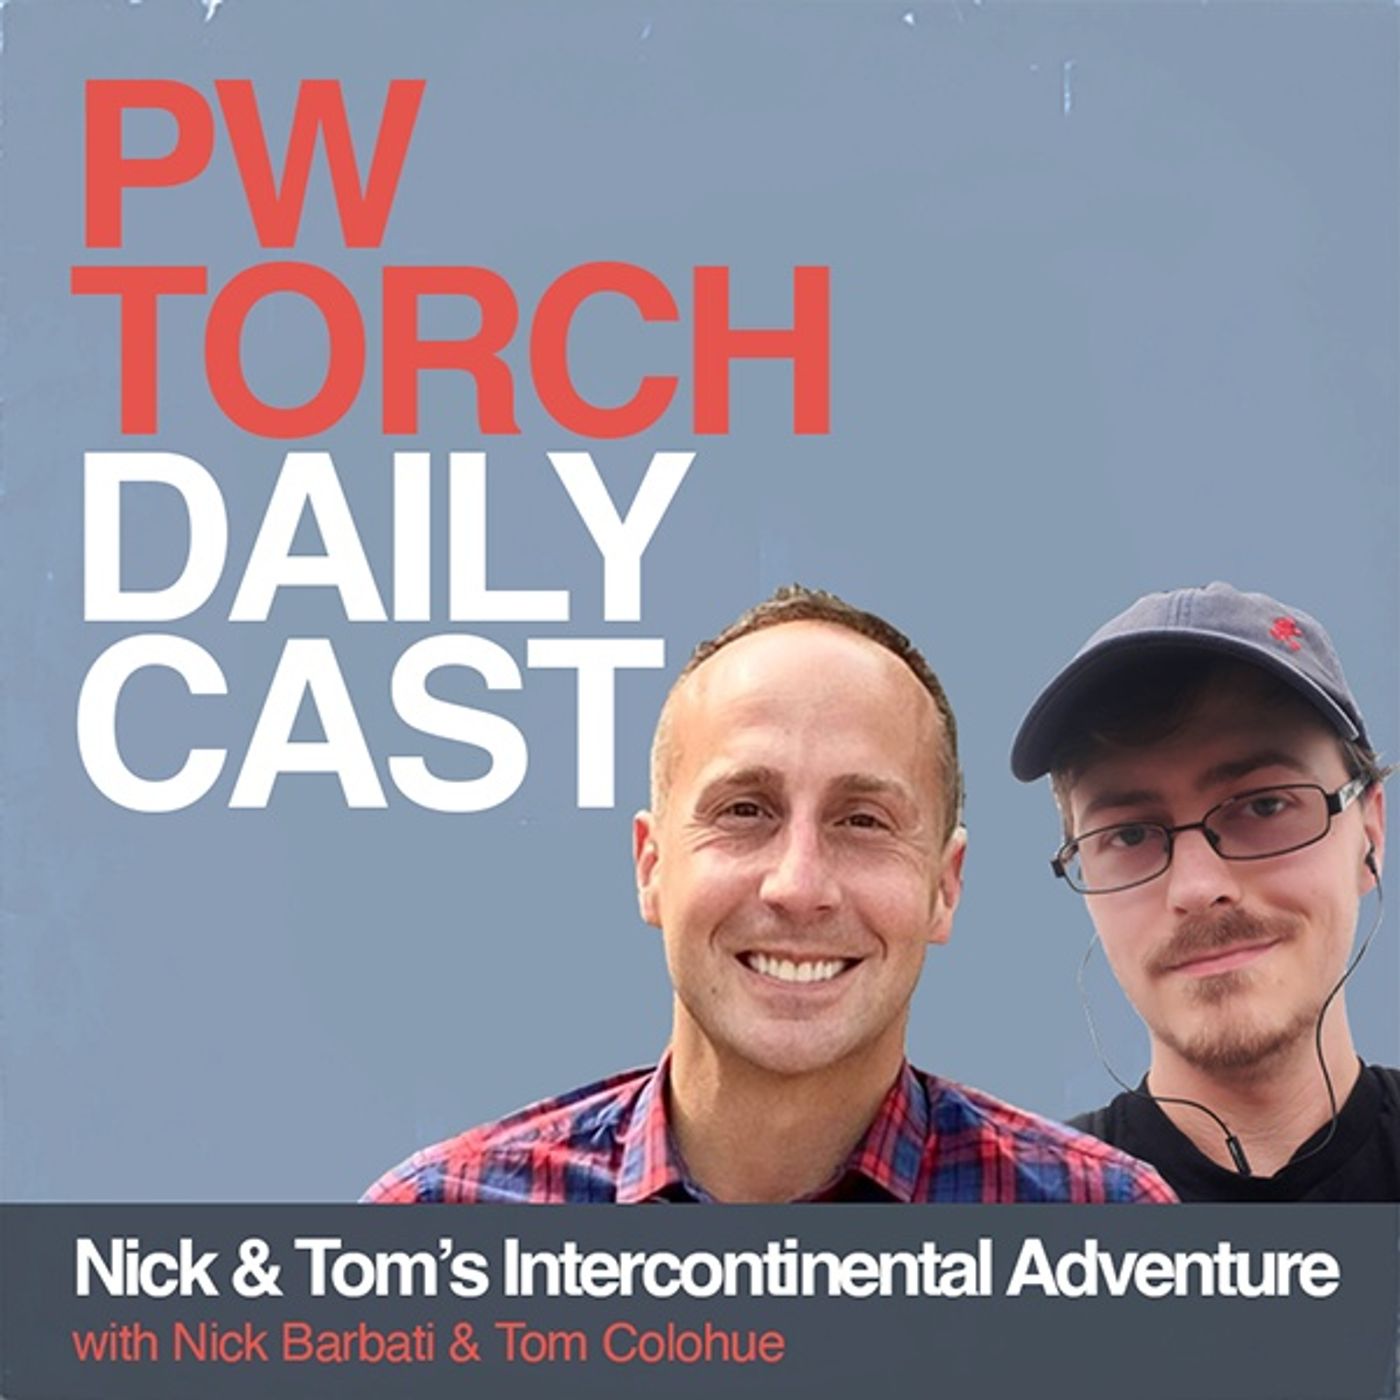 PWTorch Dailycast – Nick & Tom’s Intercontinental Adventure - Preview of WWE Night of Champions and an AEW Collision without C.M. Punk